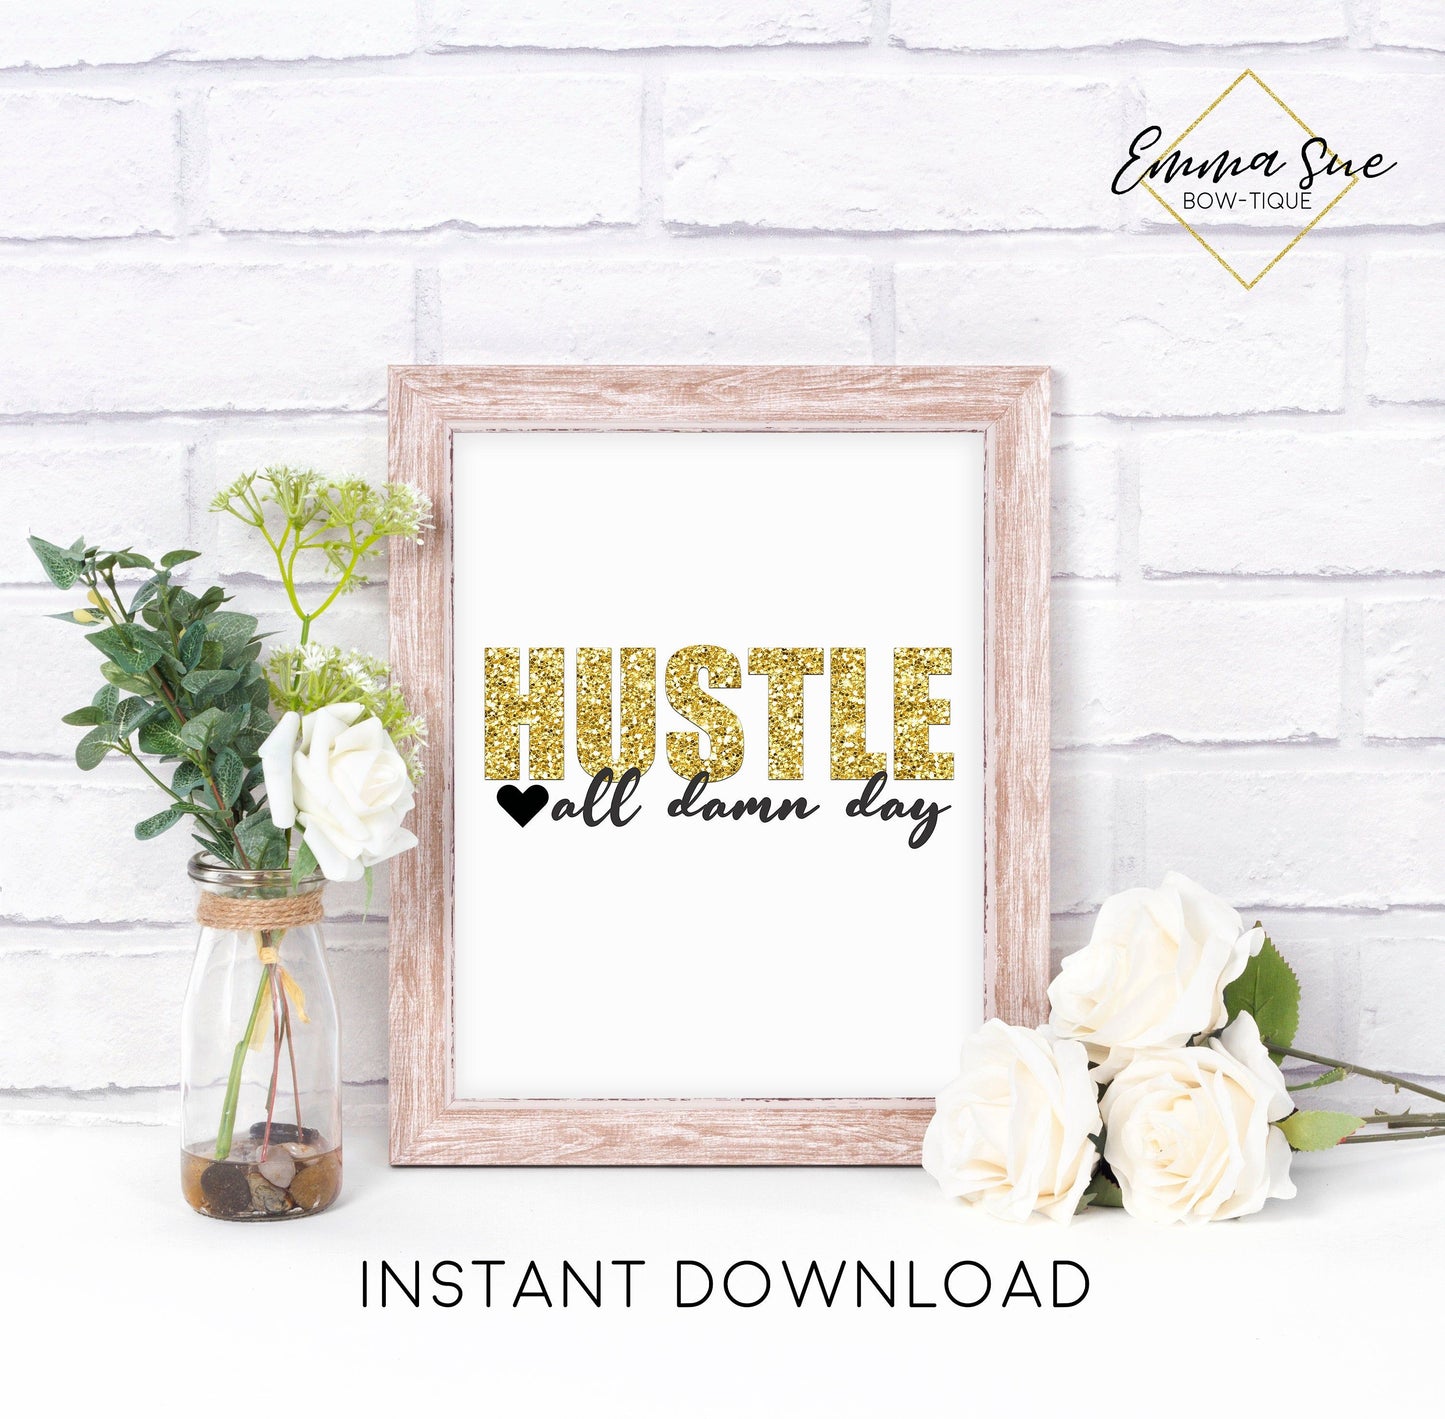 Hustle all damn day - Boss Babe Home Office Motivational Quote Printable Sign Wall Art Digital File